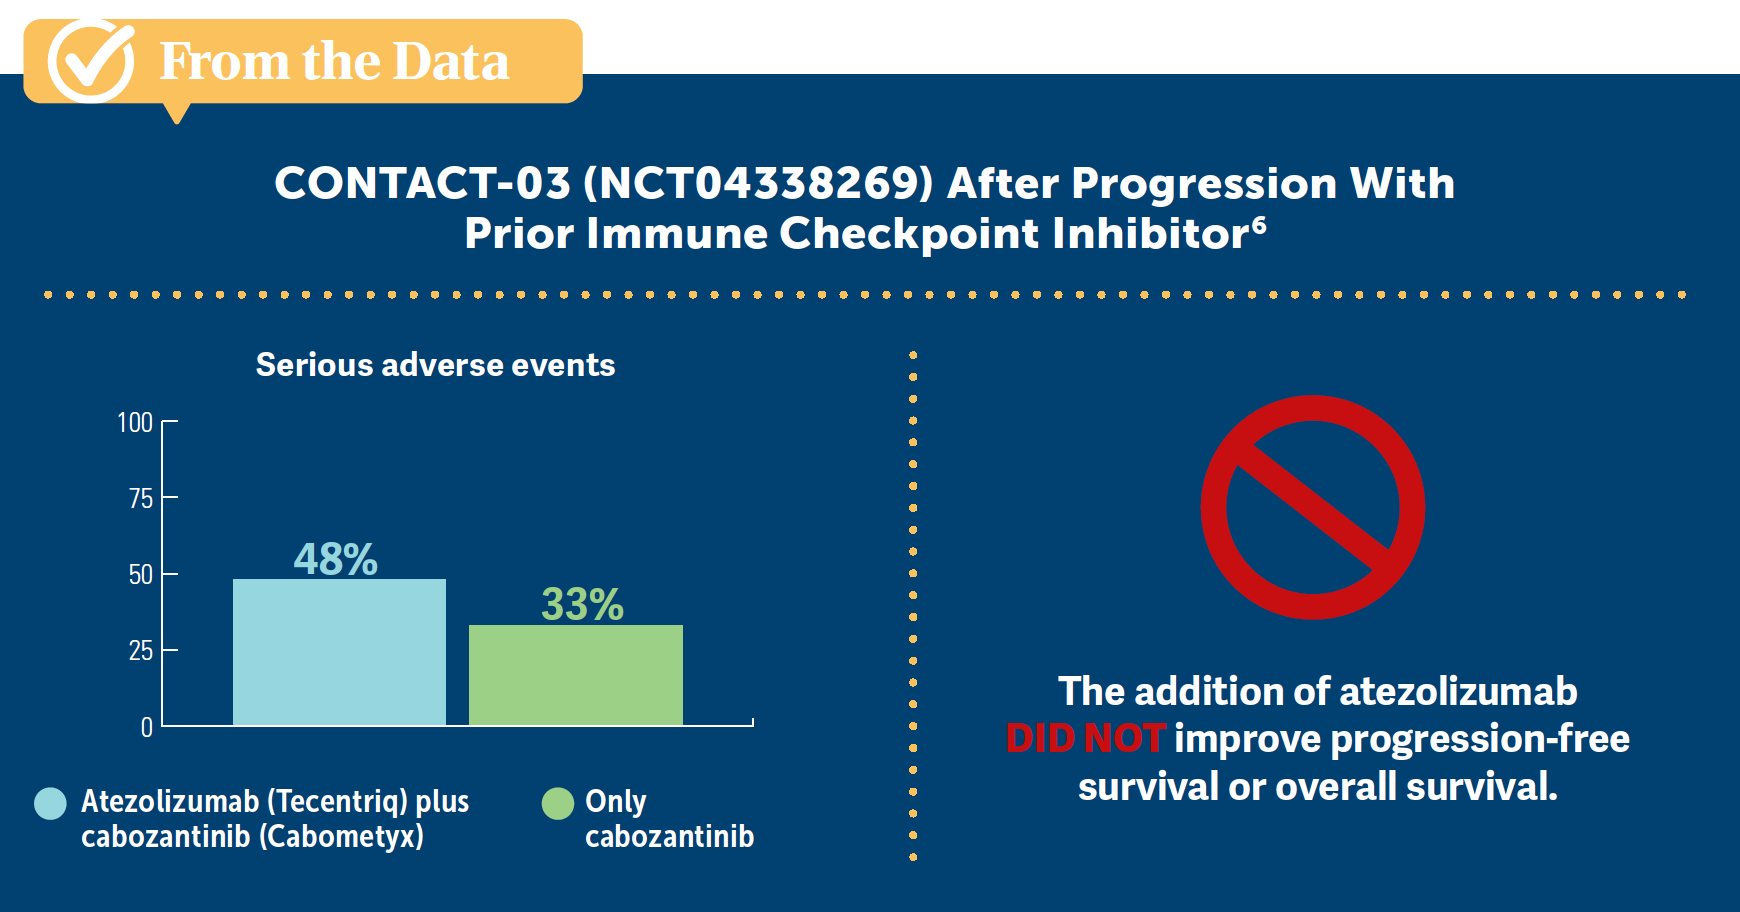 CONTACT-03 (NCT04338269) After Progression With Prior Immune Checkpoint Inhibitor